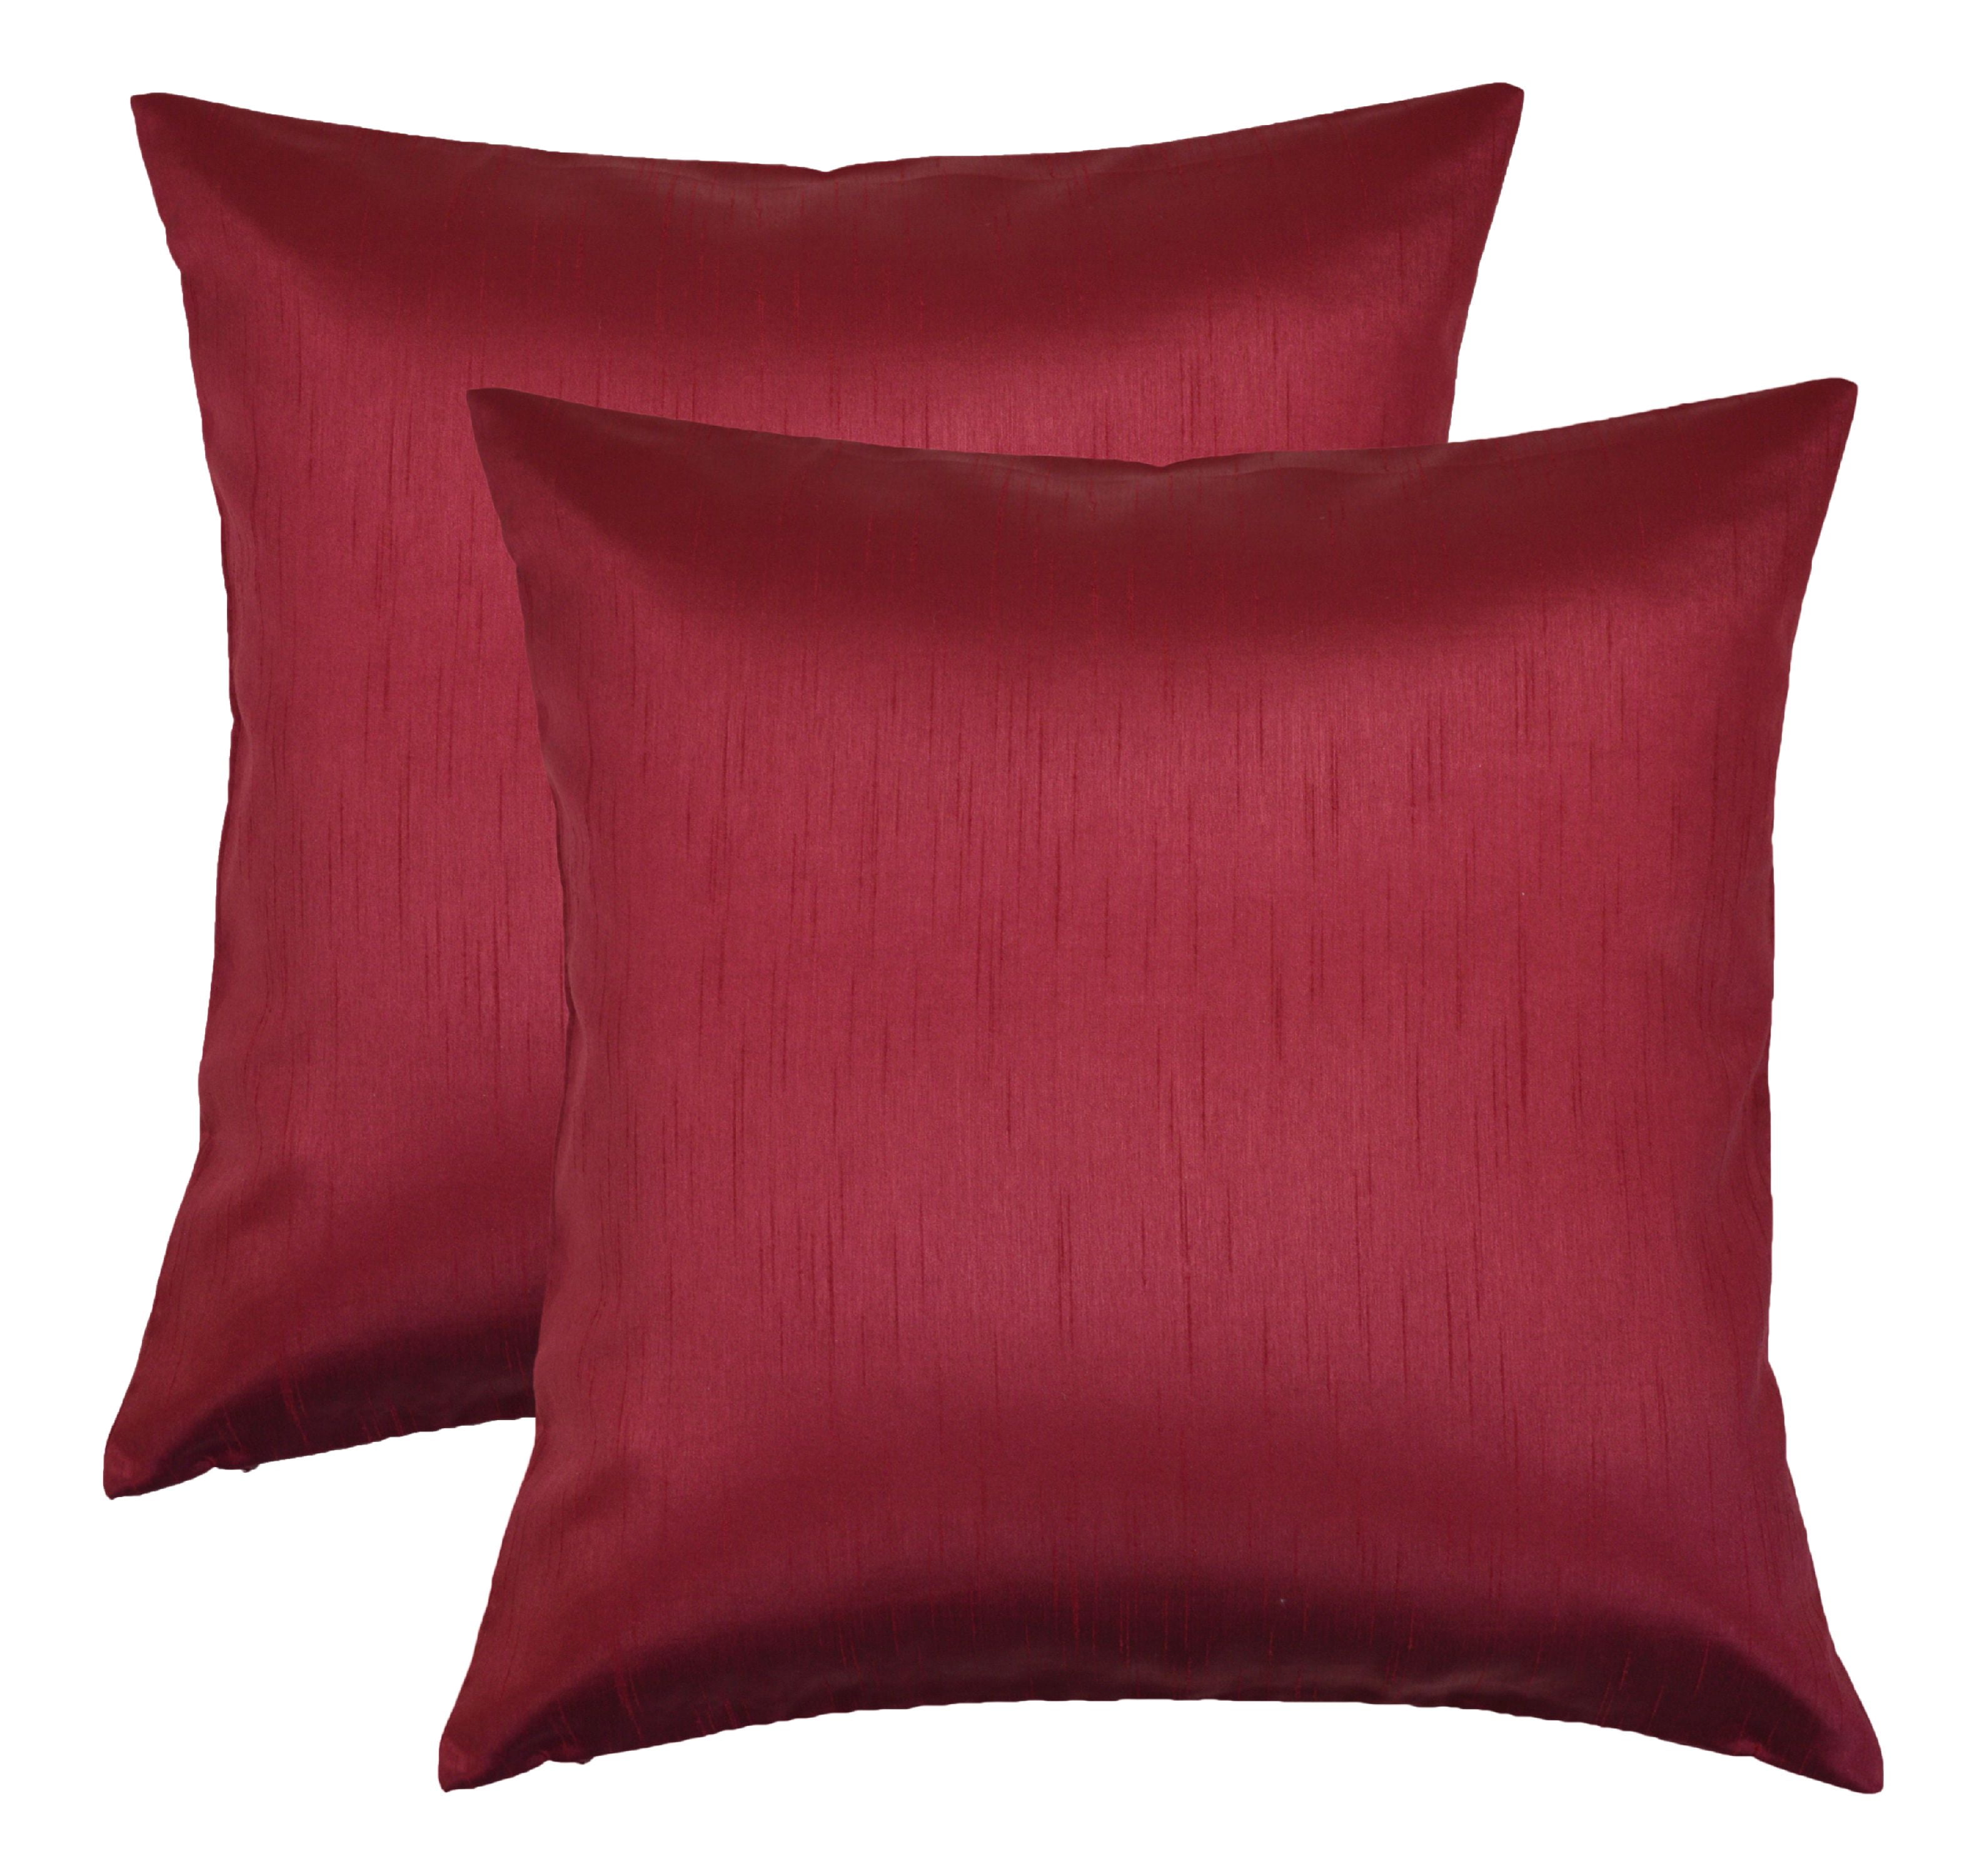 Aiking Home 18x18 Inches Faux Silk Square Throw Pillow Cover, Zipper Closure, Burgundy (Set of 2